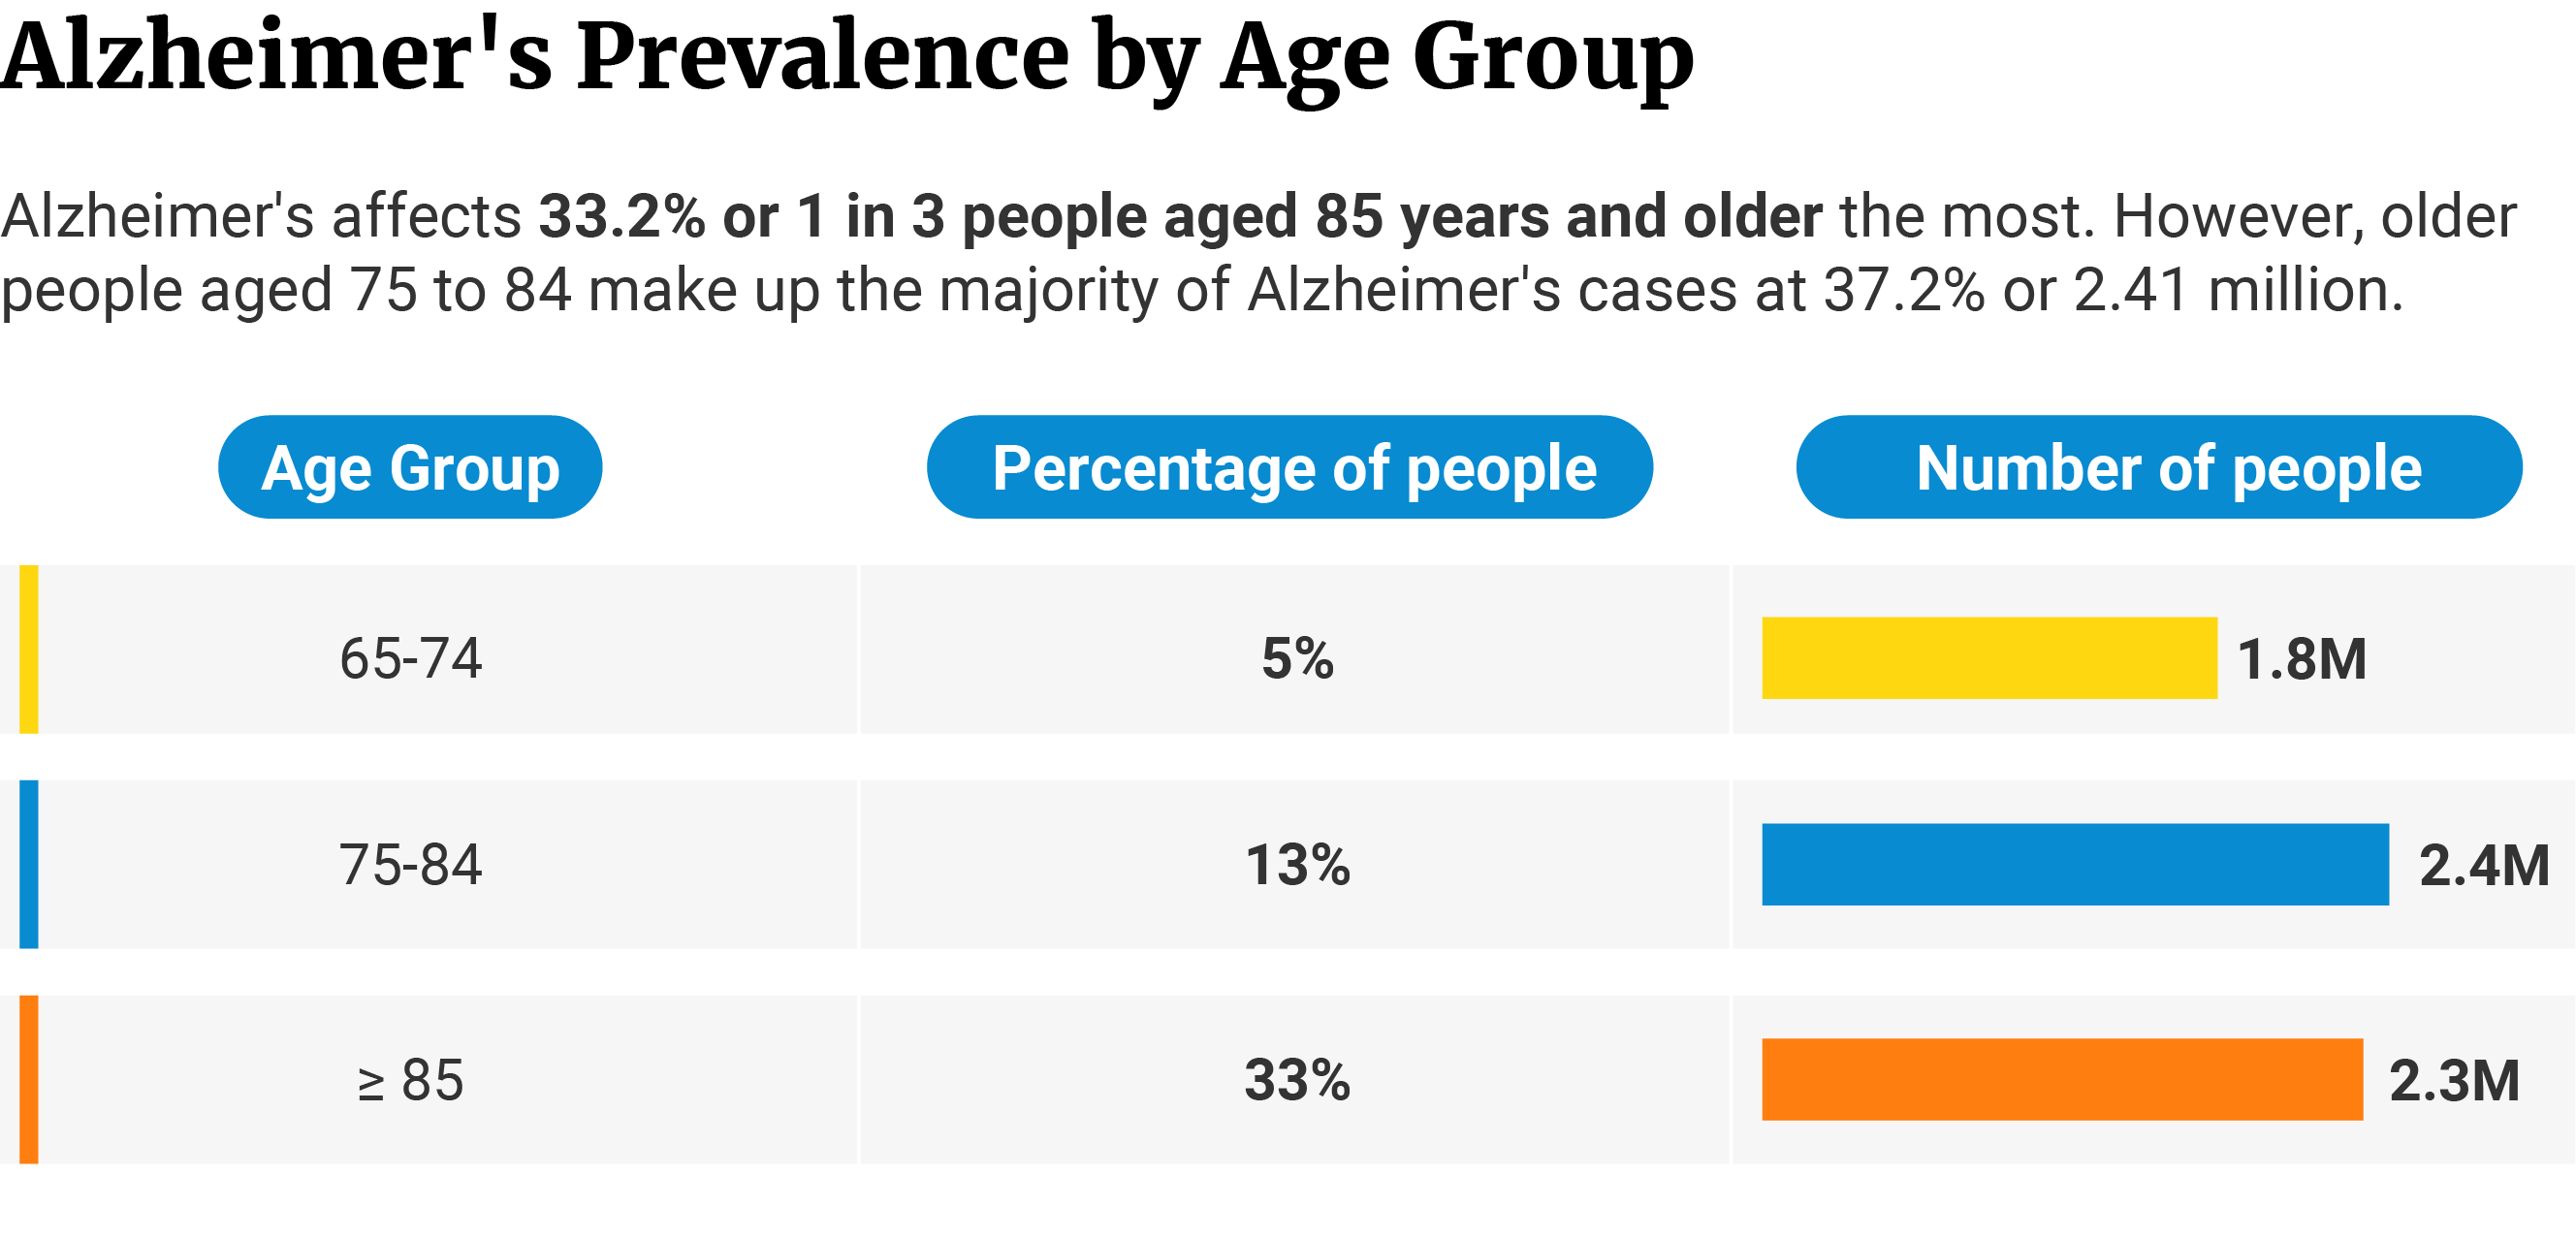 Table showing that Alzheimer's is highest among people over 85 years at 33% (2.3 million) and lowest among people 65-74 years at 5% (1.8 million).